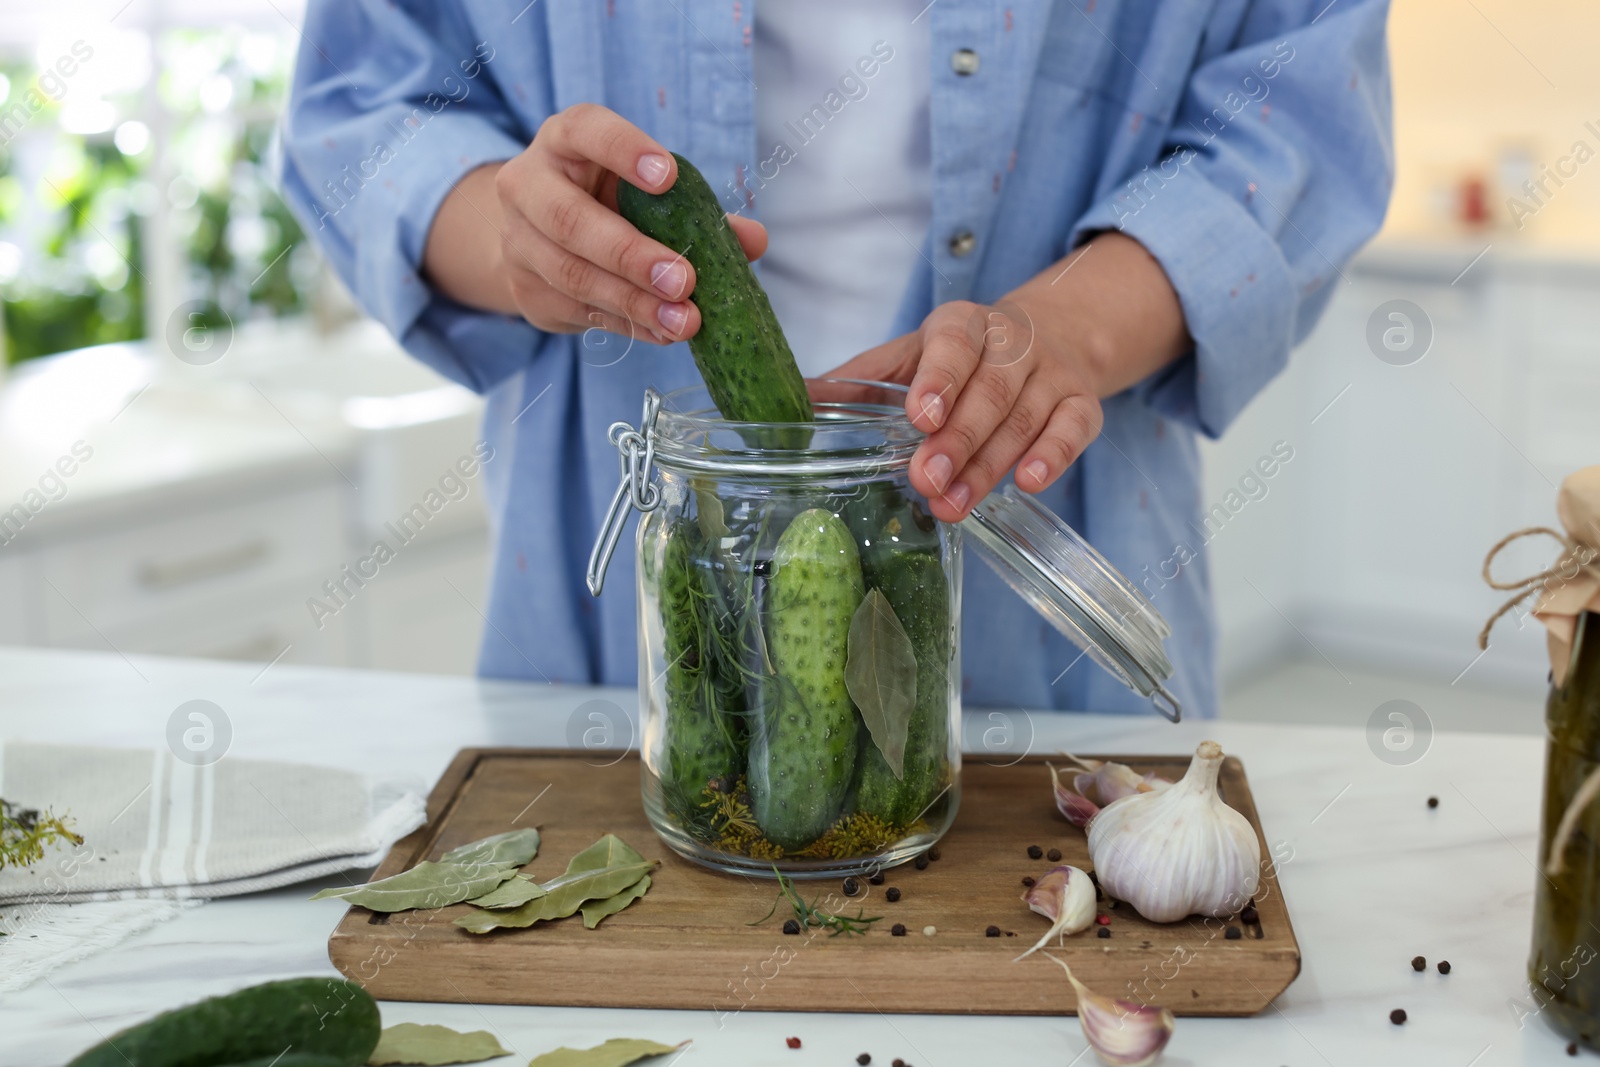 Photo of Woman putting cucumber into pickling jar at table in kitchen, closeup